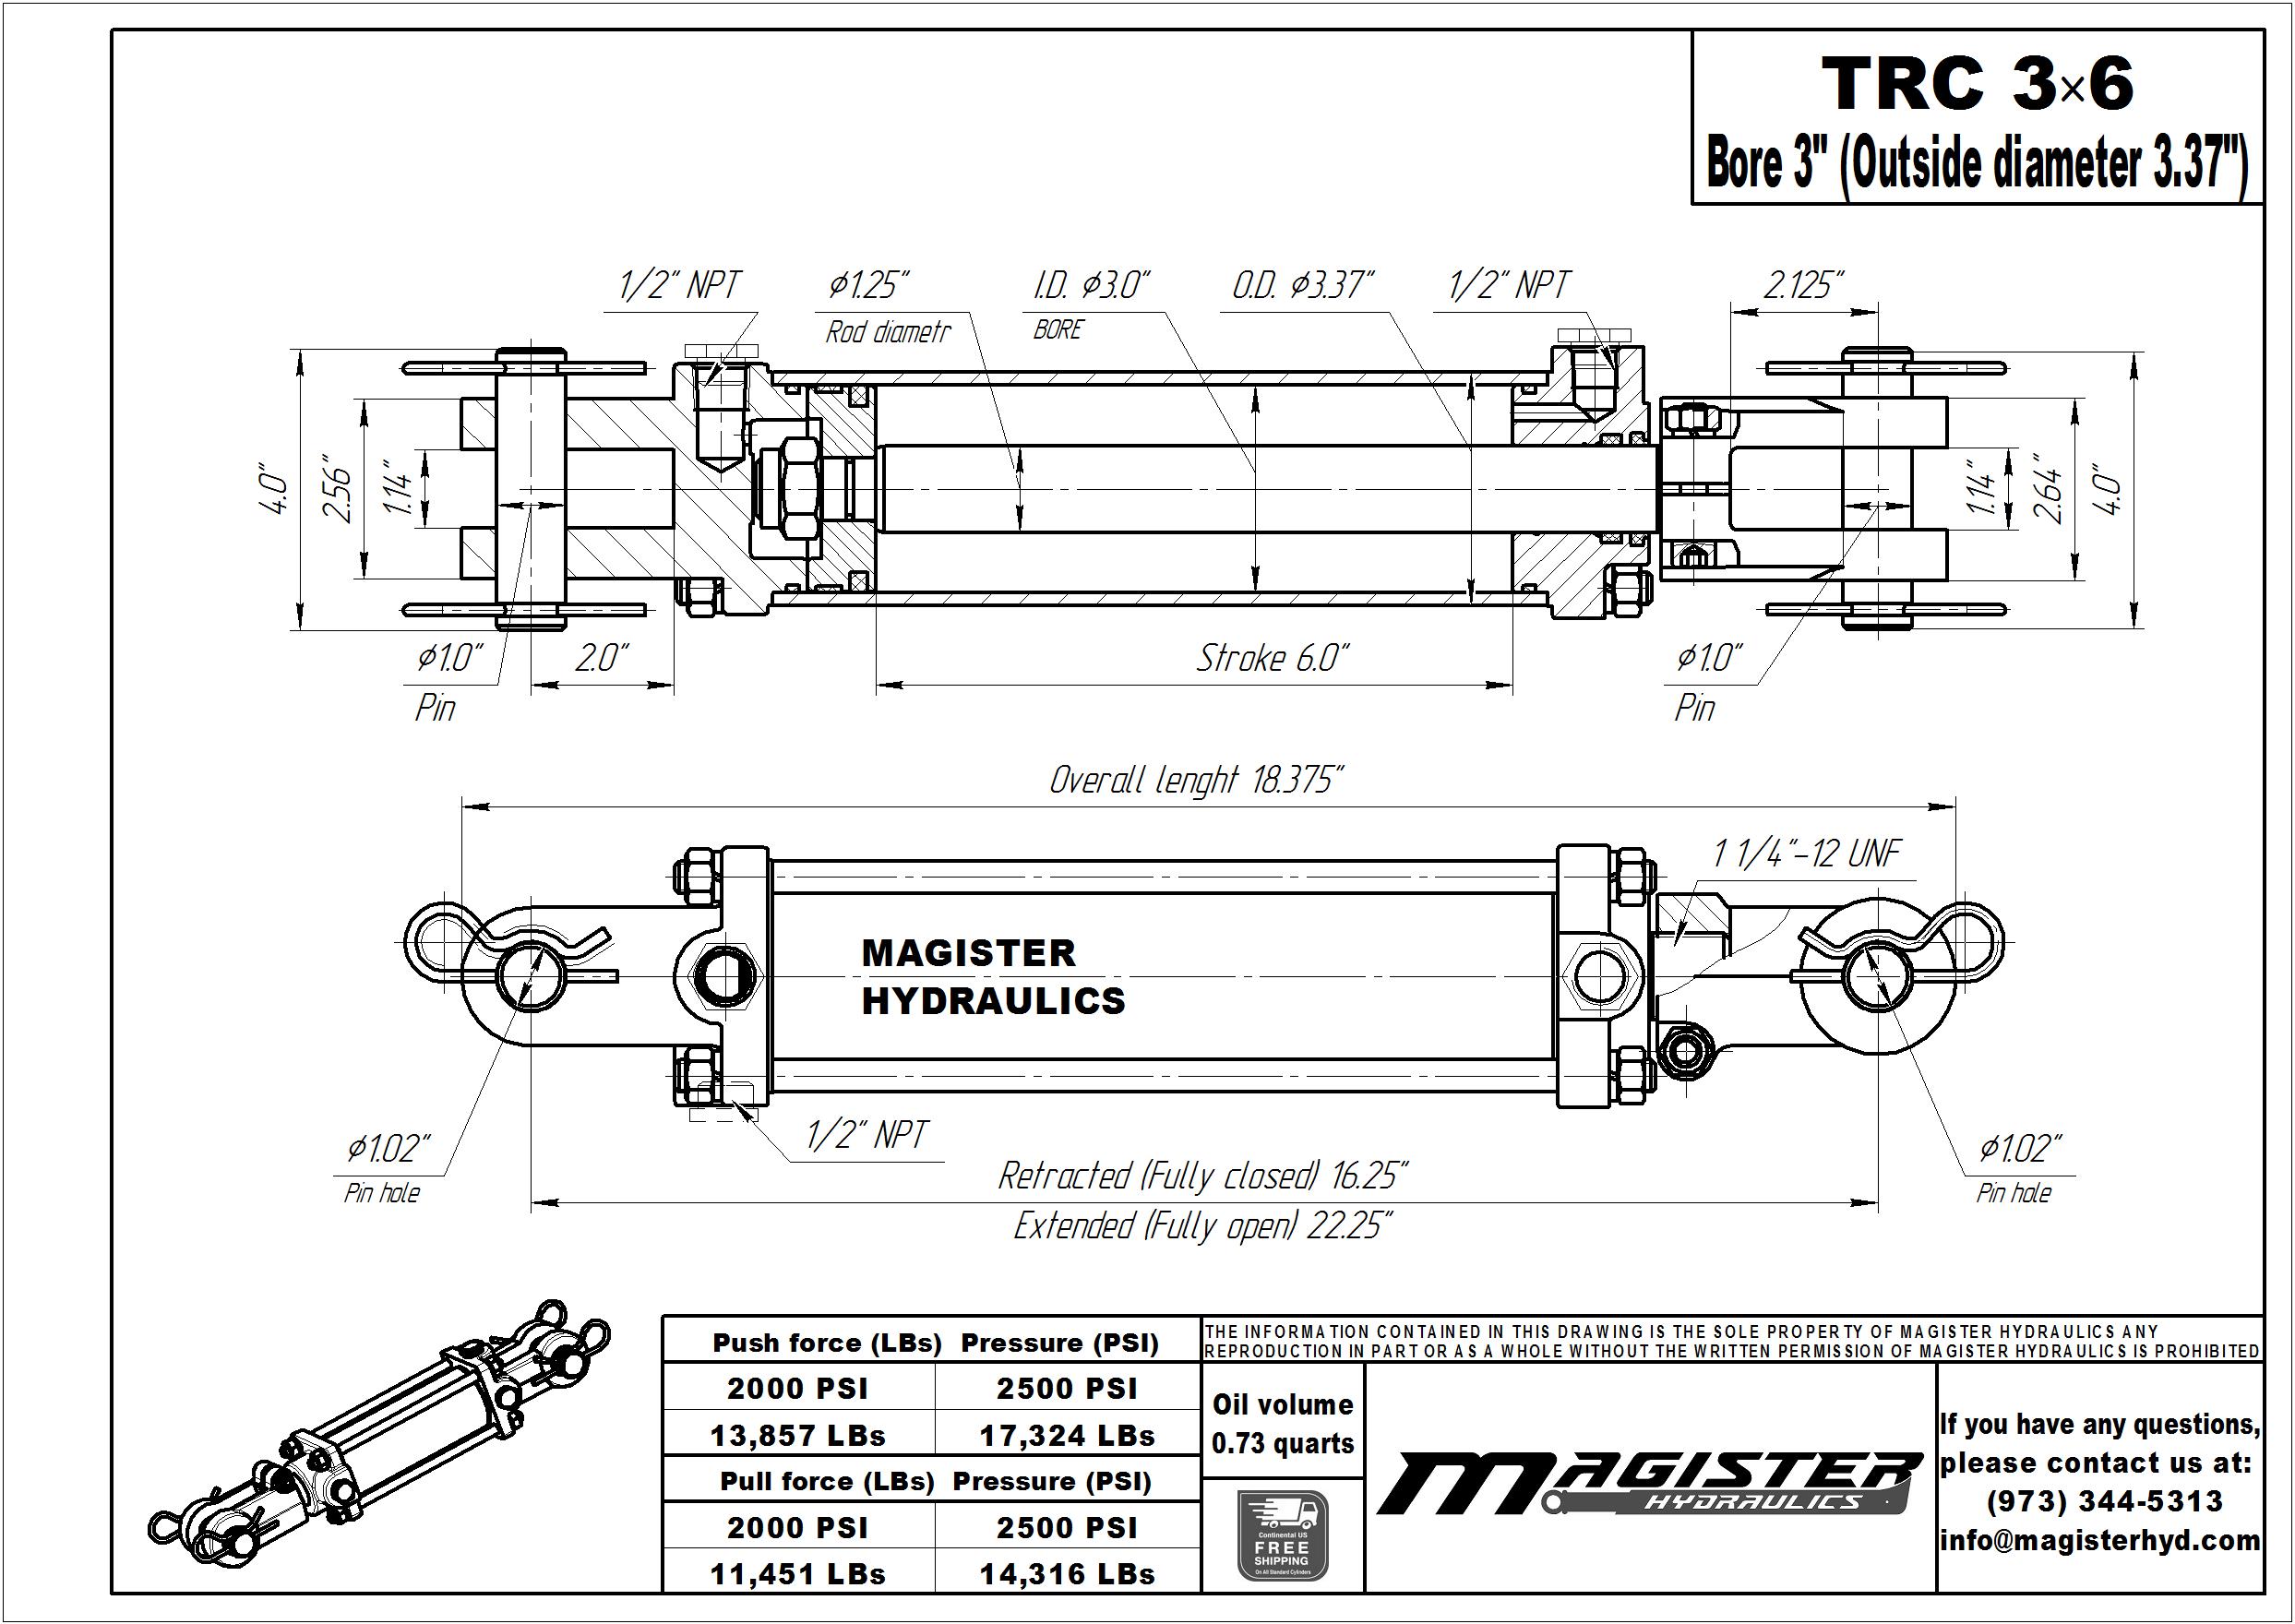 3 bore x 6 stroke hydraulic cylinder, tie rod double acting cylinder | Magister Hydraulics